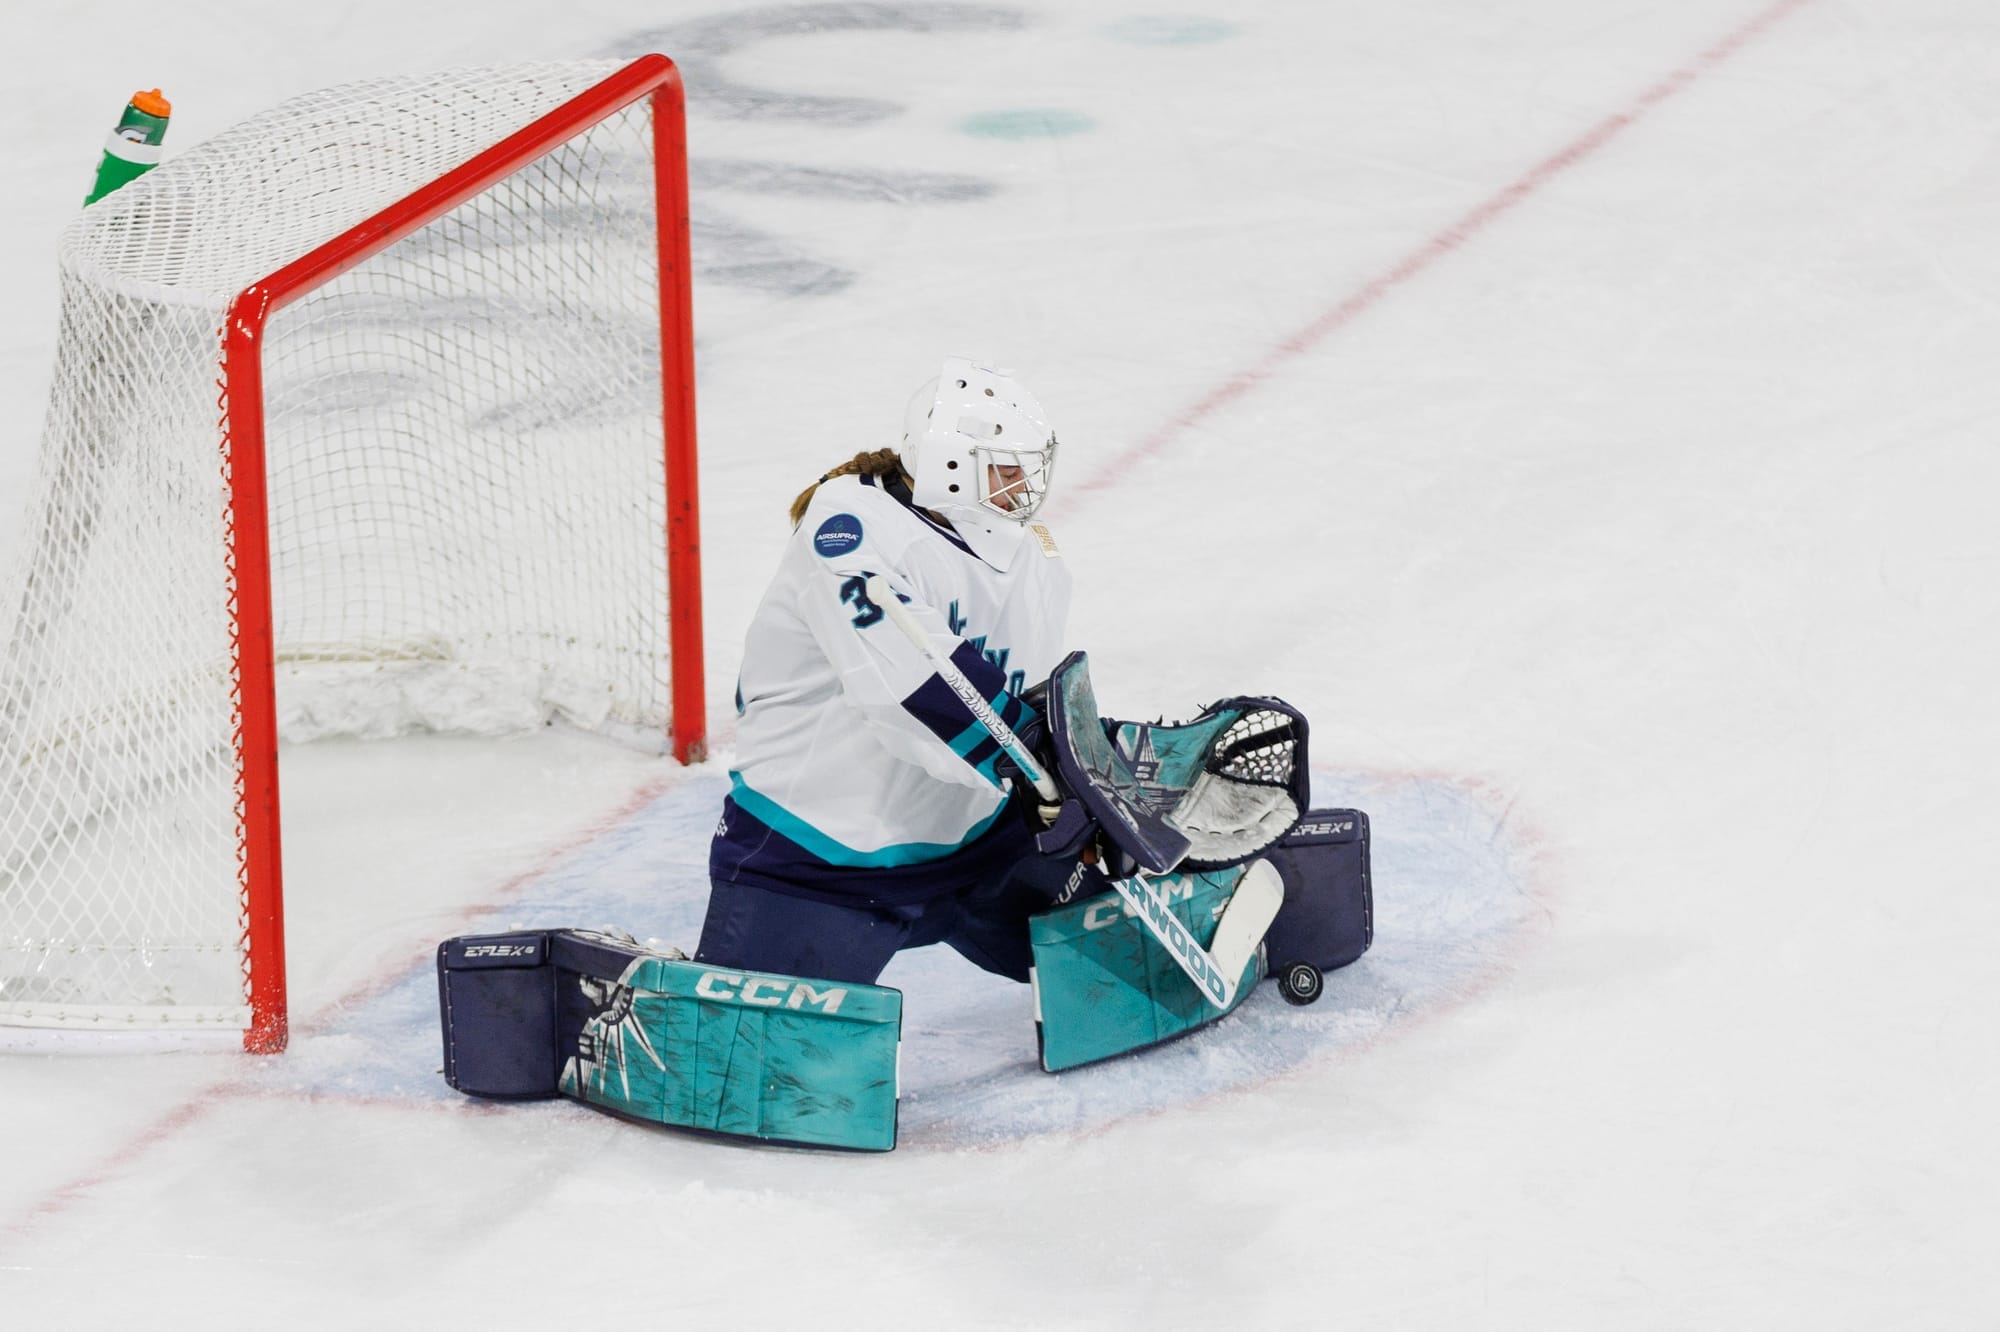 Corinne Schroeder makes a save against Boston. She is on her knees and kicking the puck out to her left. She is wearing a white mask and jersey to go with her teal/navy New York pads.